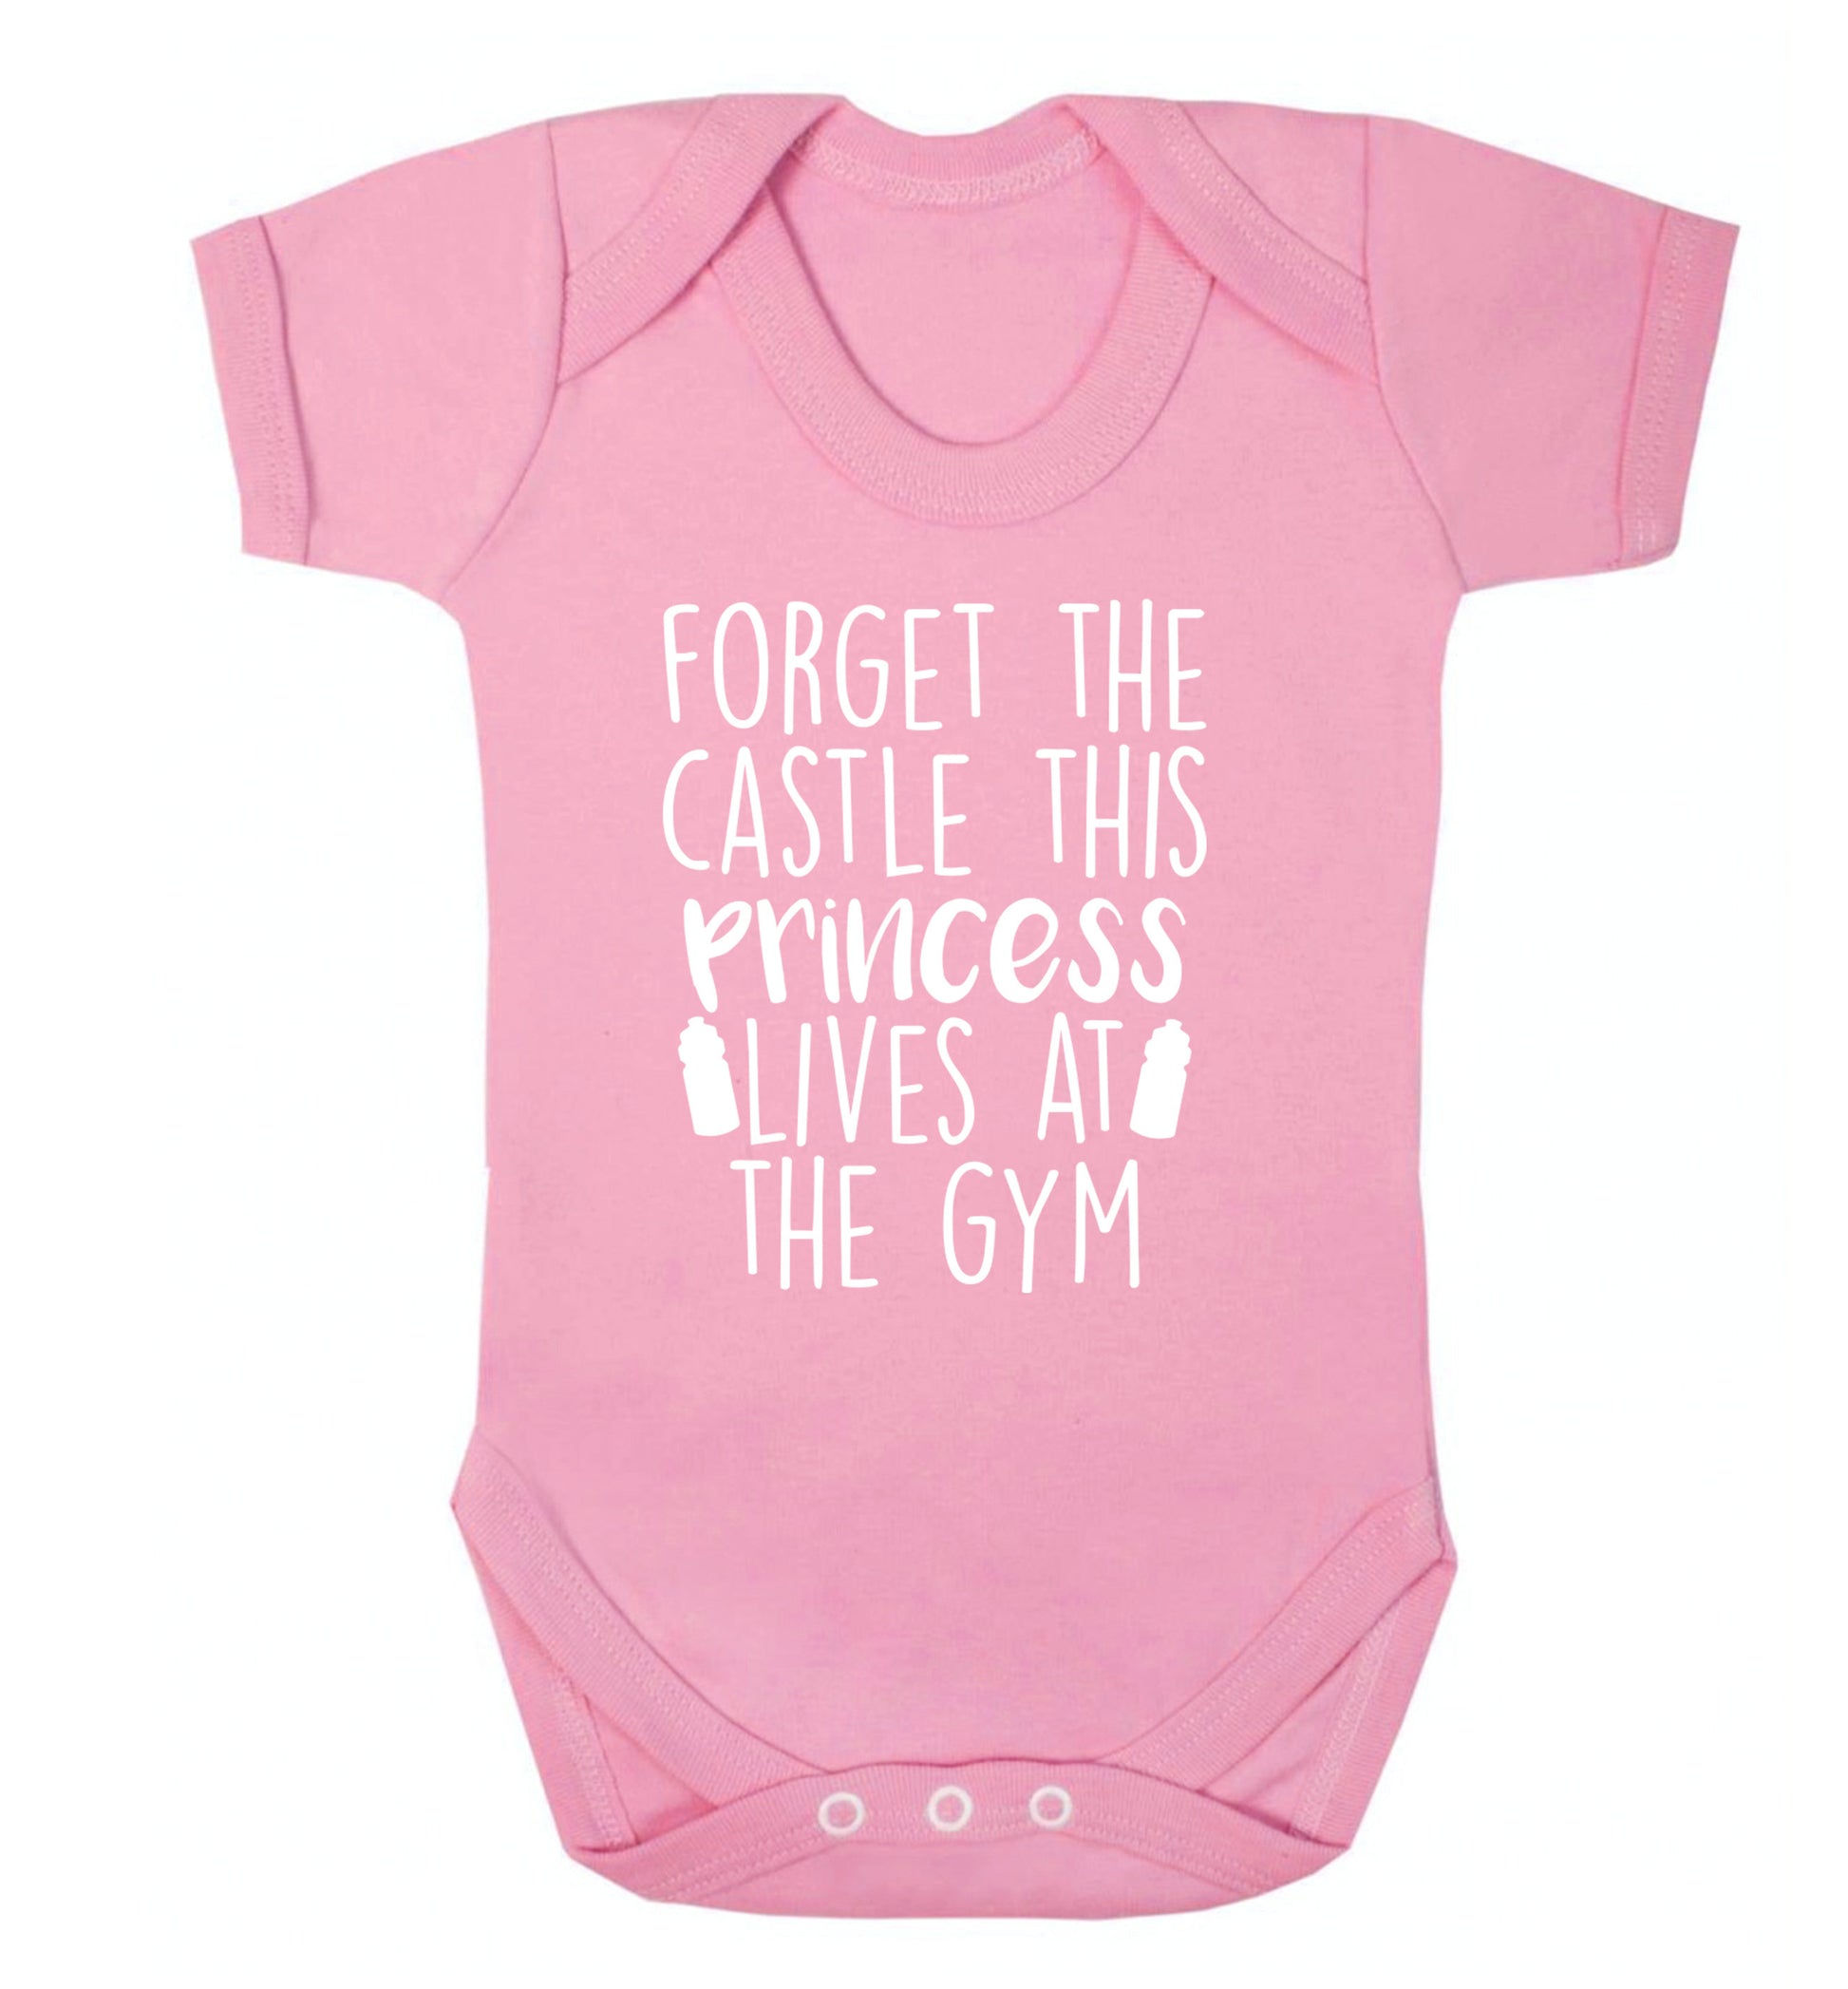 Forget the castle this princess lives at the gym Baby Vest pale pink 18-24 months